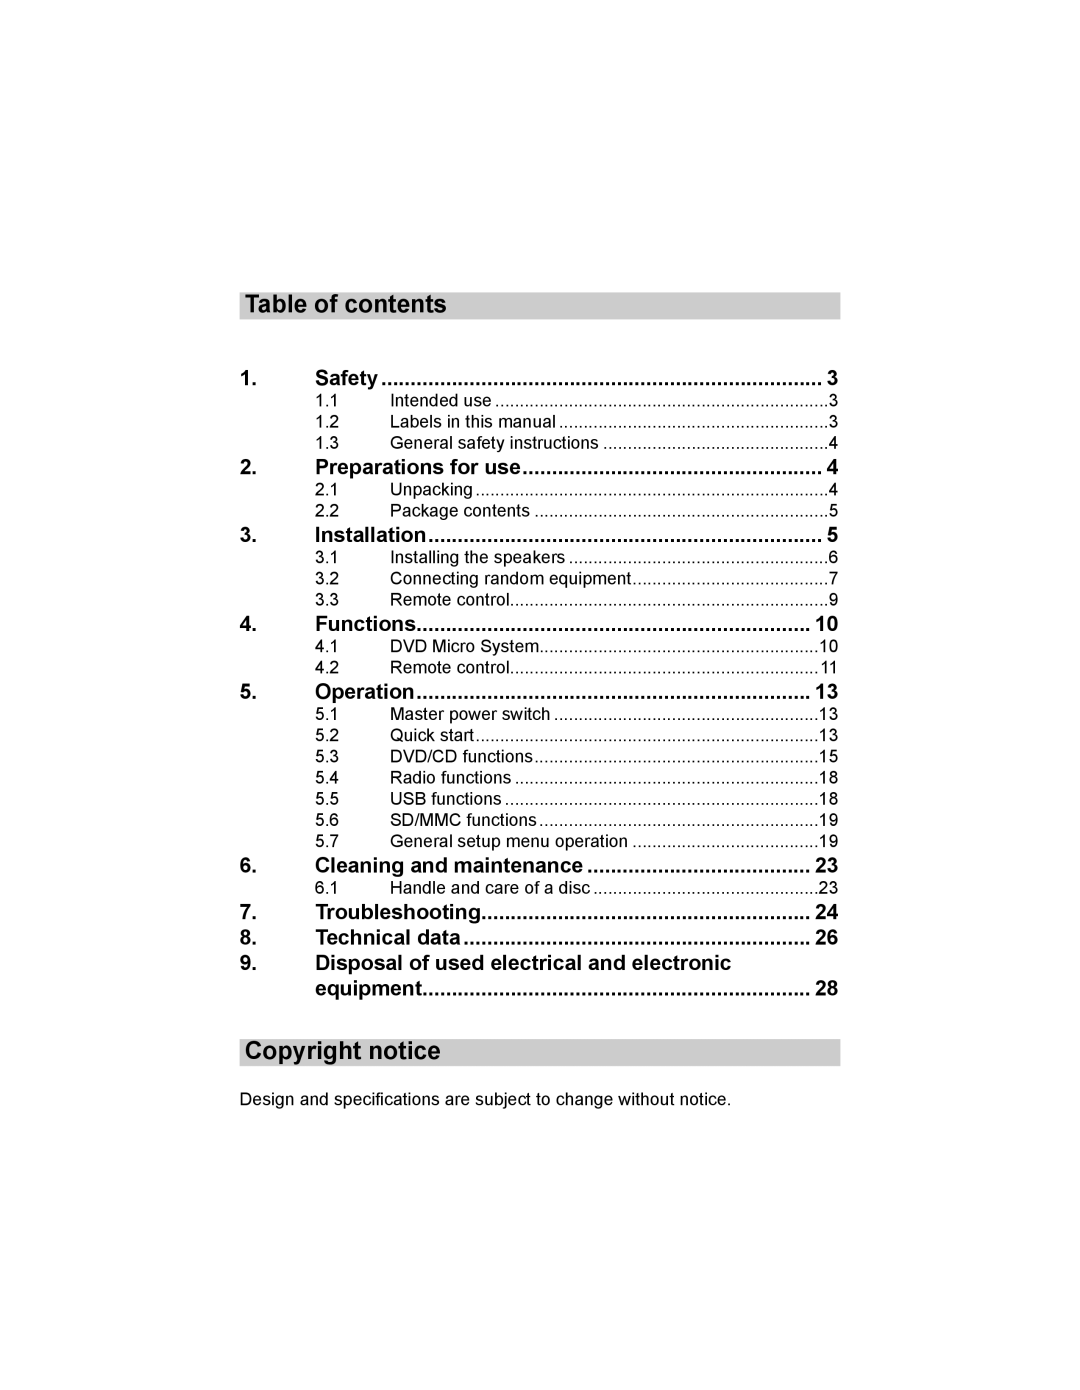 Akai AMD20 manual Table of contents, Copyright notice 